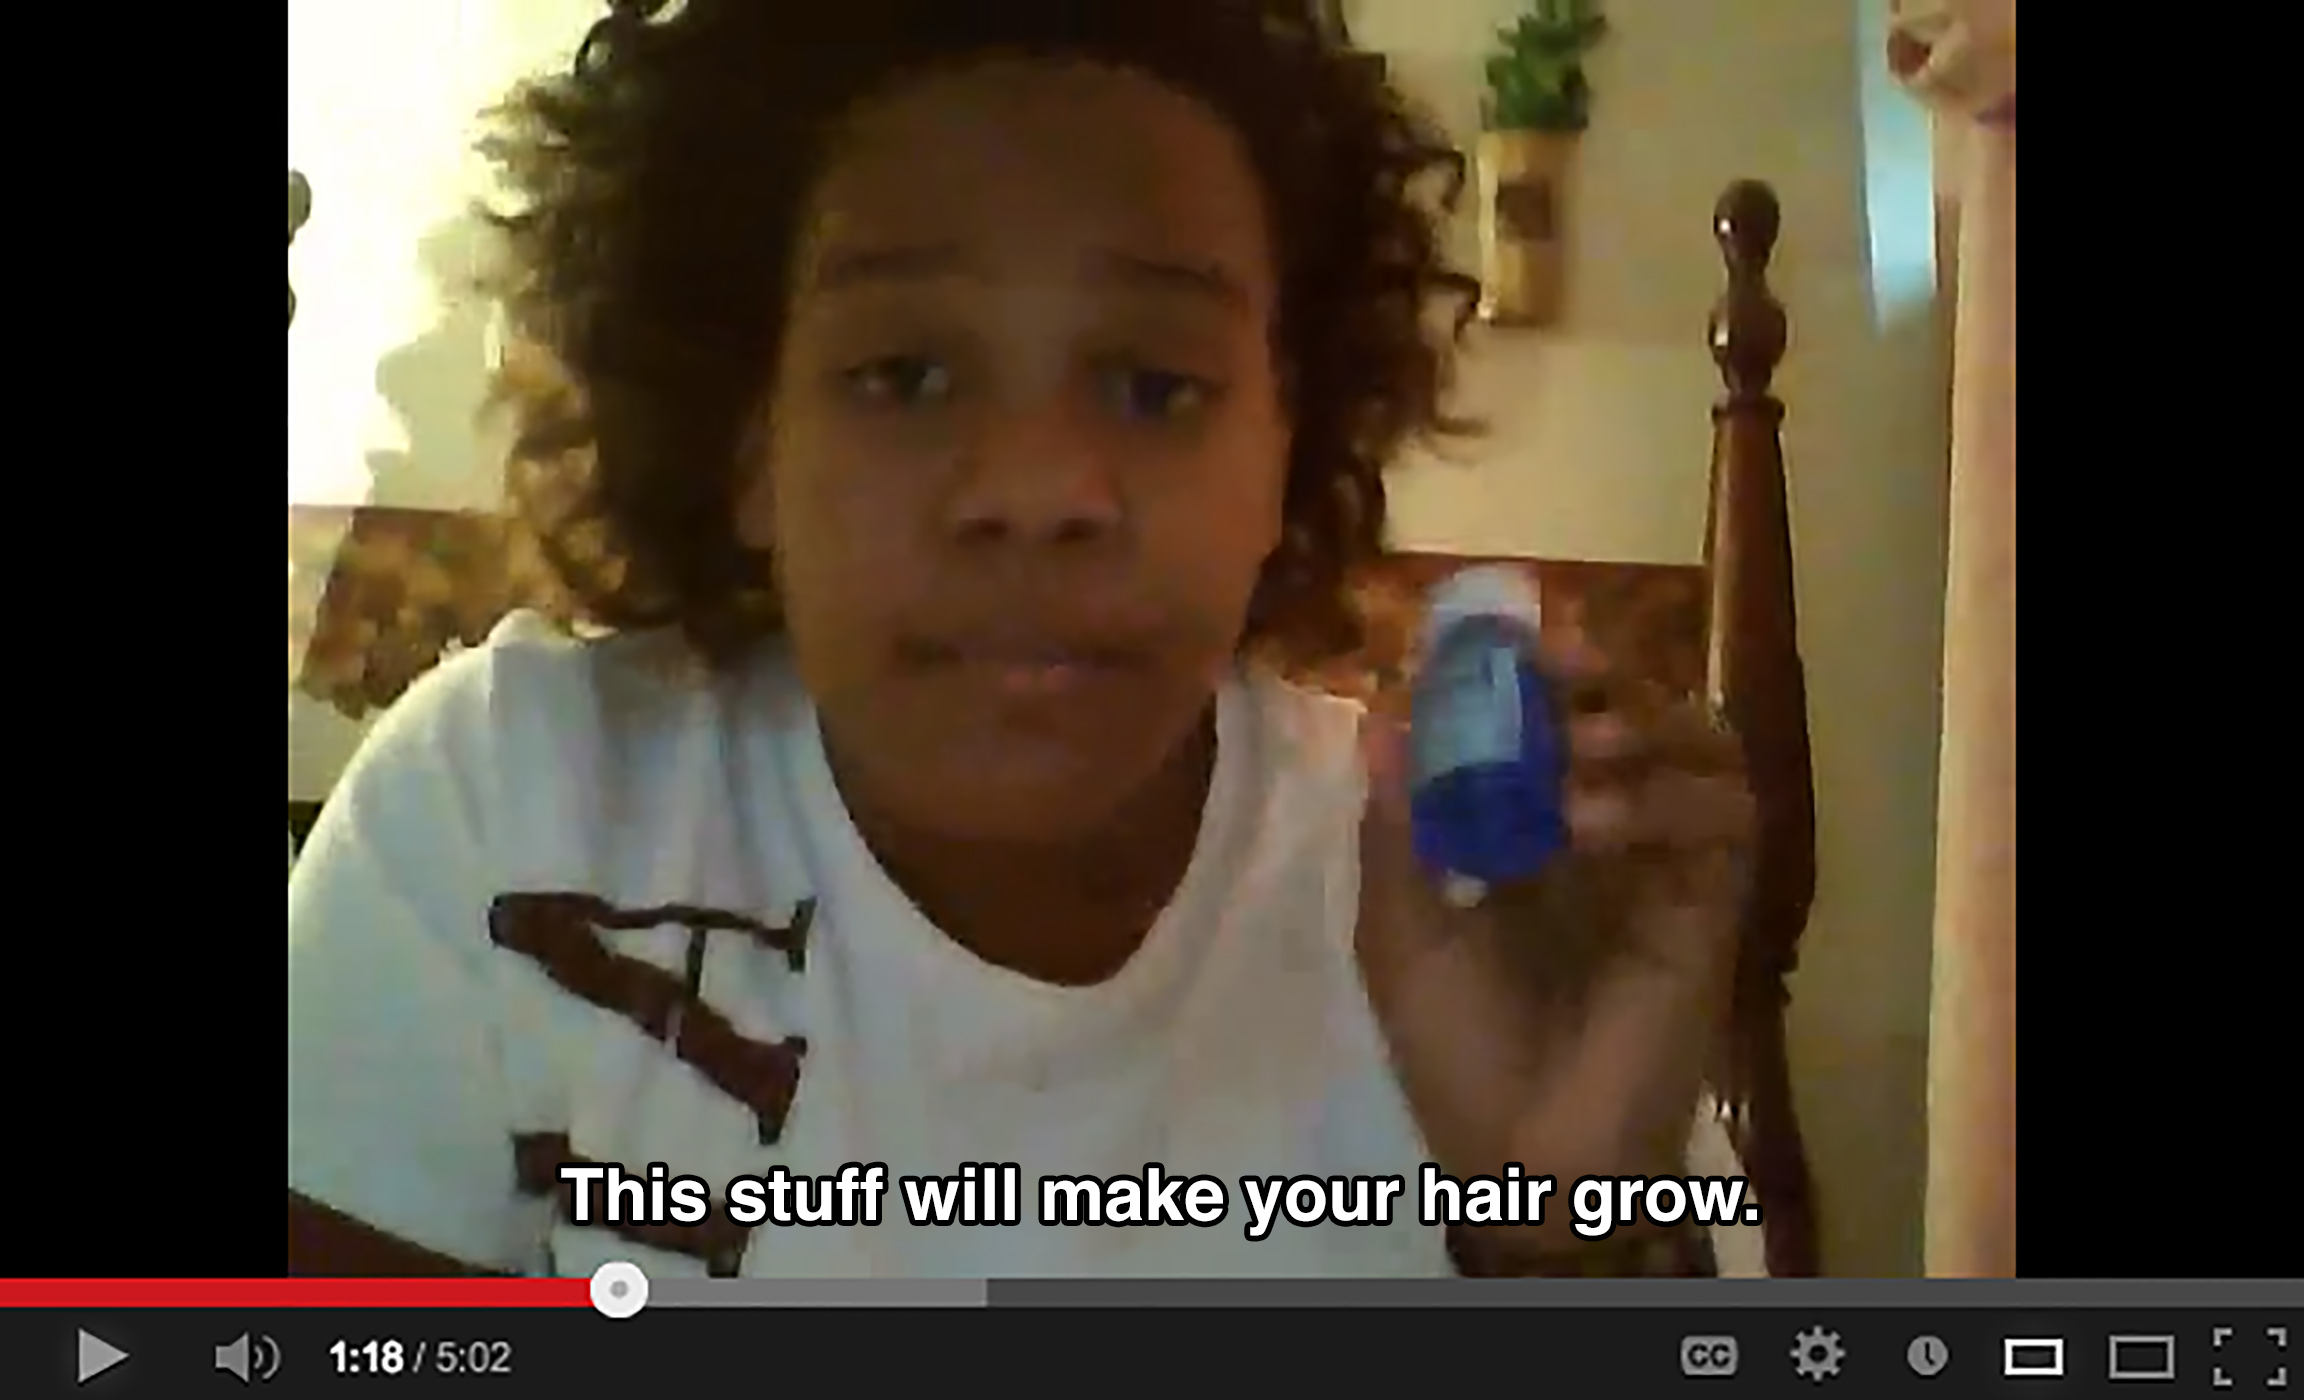 A teenager in a bedroom holds up a small blue container and says: This stuff will make your hair grow.